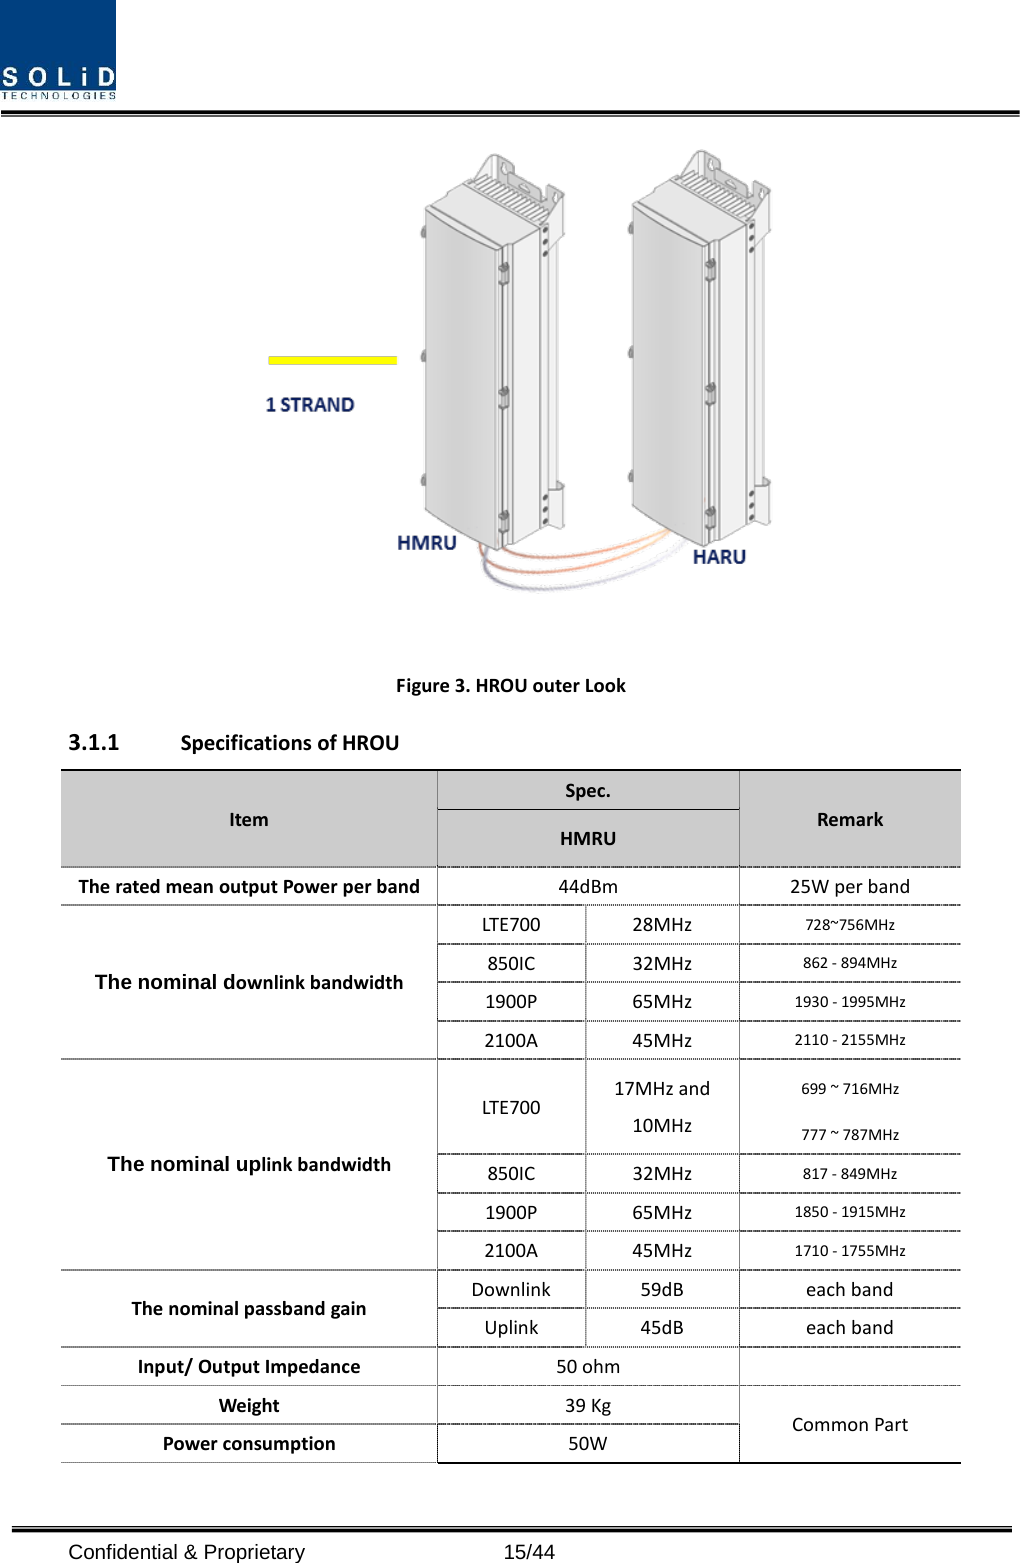   Figure 3. HROU outer Look 3.1.1 Specifications of HROU Item Spec. Remark HMRU The rated mean output Power per band 44dBm   25W per band The nominal downlink bandwidth LTE700 28MHz 728~756MHz 850IC 32MHz 862 - 894MHz 1900P 65MHz 1930 - 1995MHz 2100A 45MHz 2110 - 2155MHz   The nominal uplink bandwidth LTE700 17MHz and 10MHz 699 ~ 716MHz   777 ~ 787MHz 850IC 32MHz 817 - 849MHz   1900P 65MHz 1850 - 1915MHz   2100A 45MHz 1710 - 1755MHz The nominal passband gain Downlink 59dB  each band Uplink 45dB  each band Input/ Output Impedance   50 ohm     Weight 39 Kg Common Part Power consumption 50W Confidential &amp; Proprietary                   15/44 